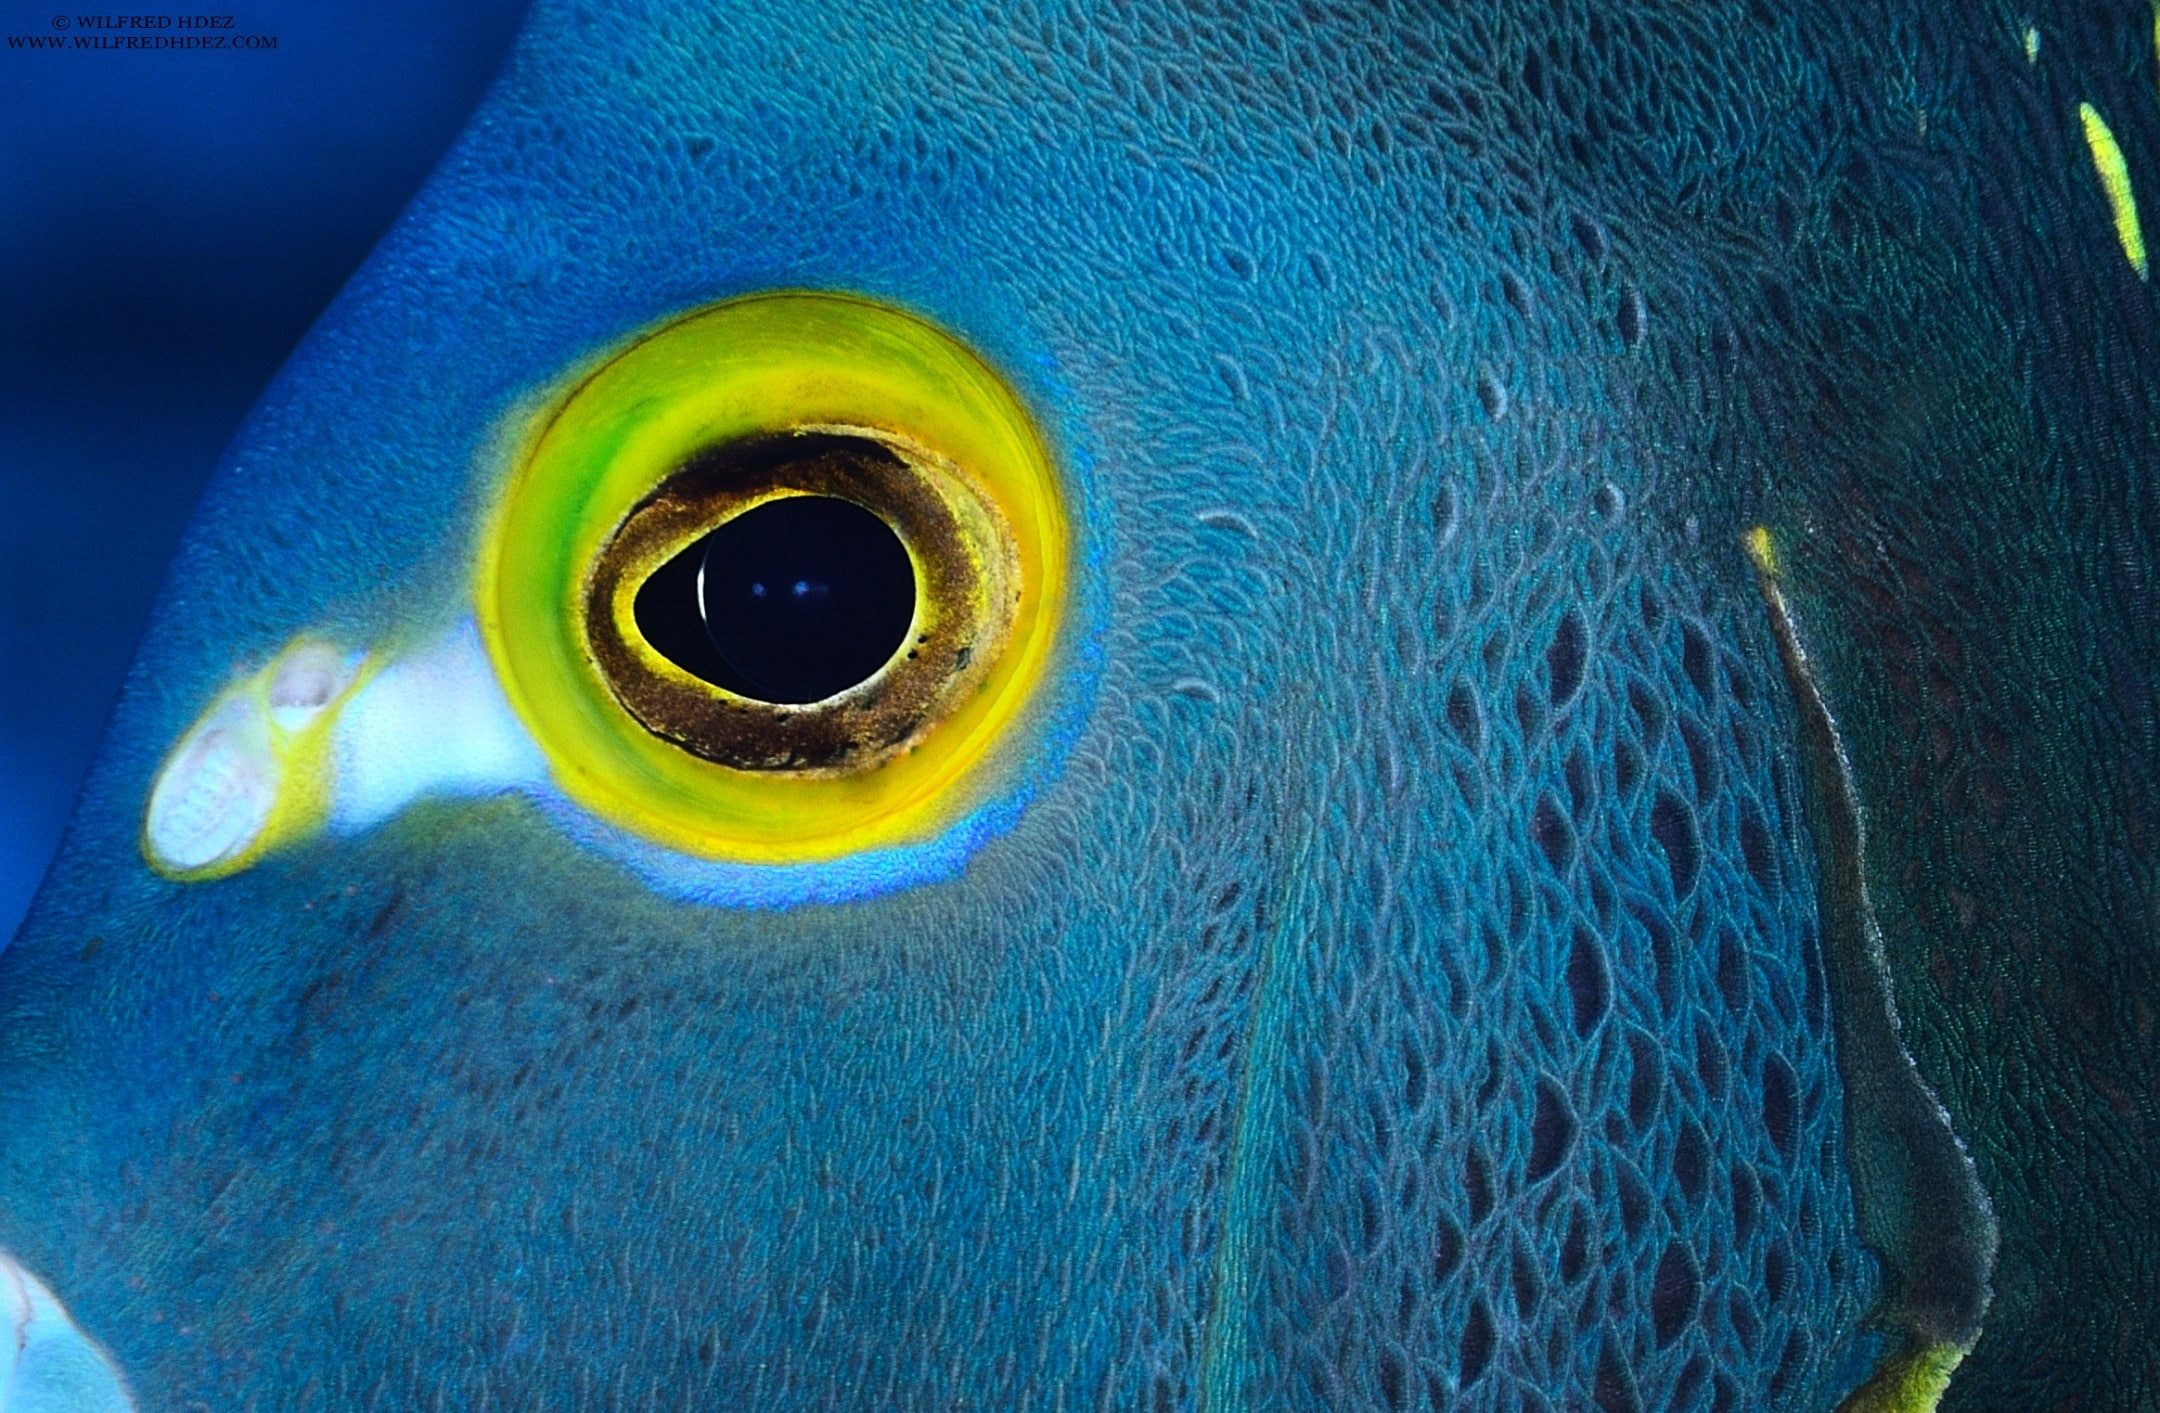 Blue Fish with Yellow Eyes, Animals, Sea, Underwater, Photography